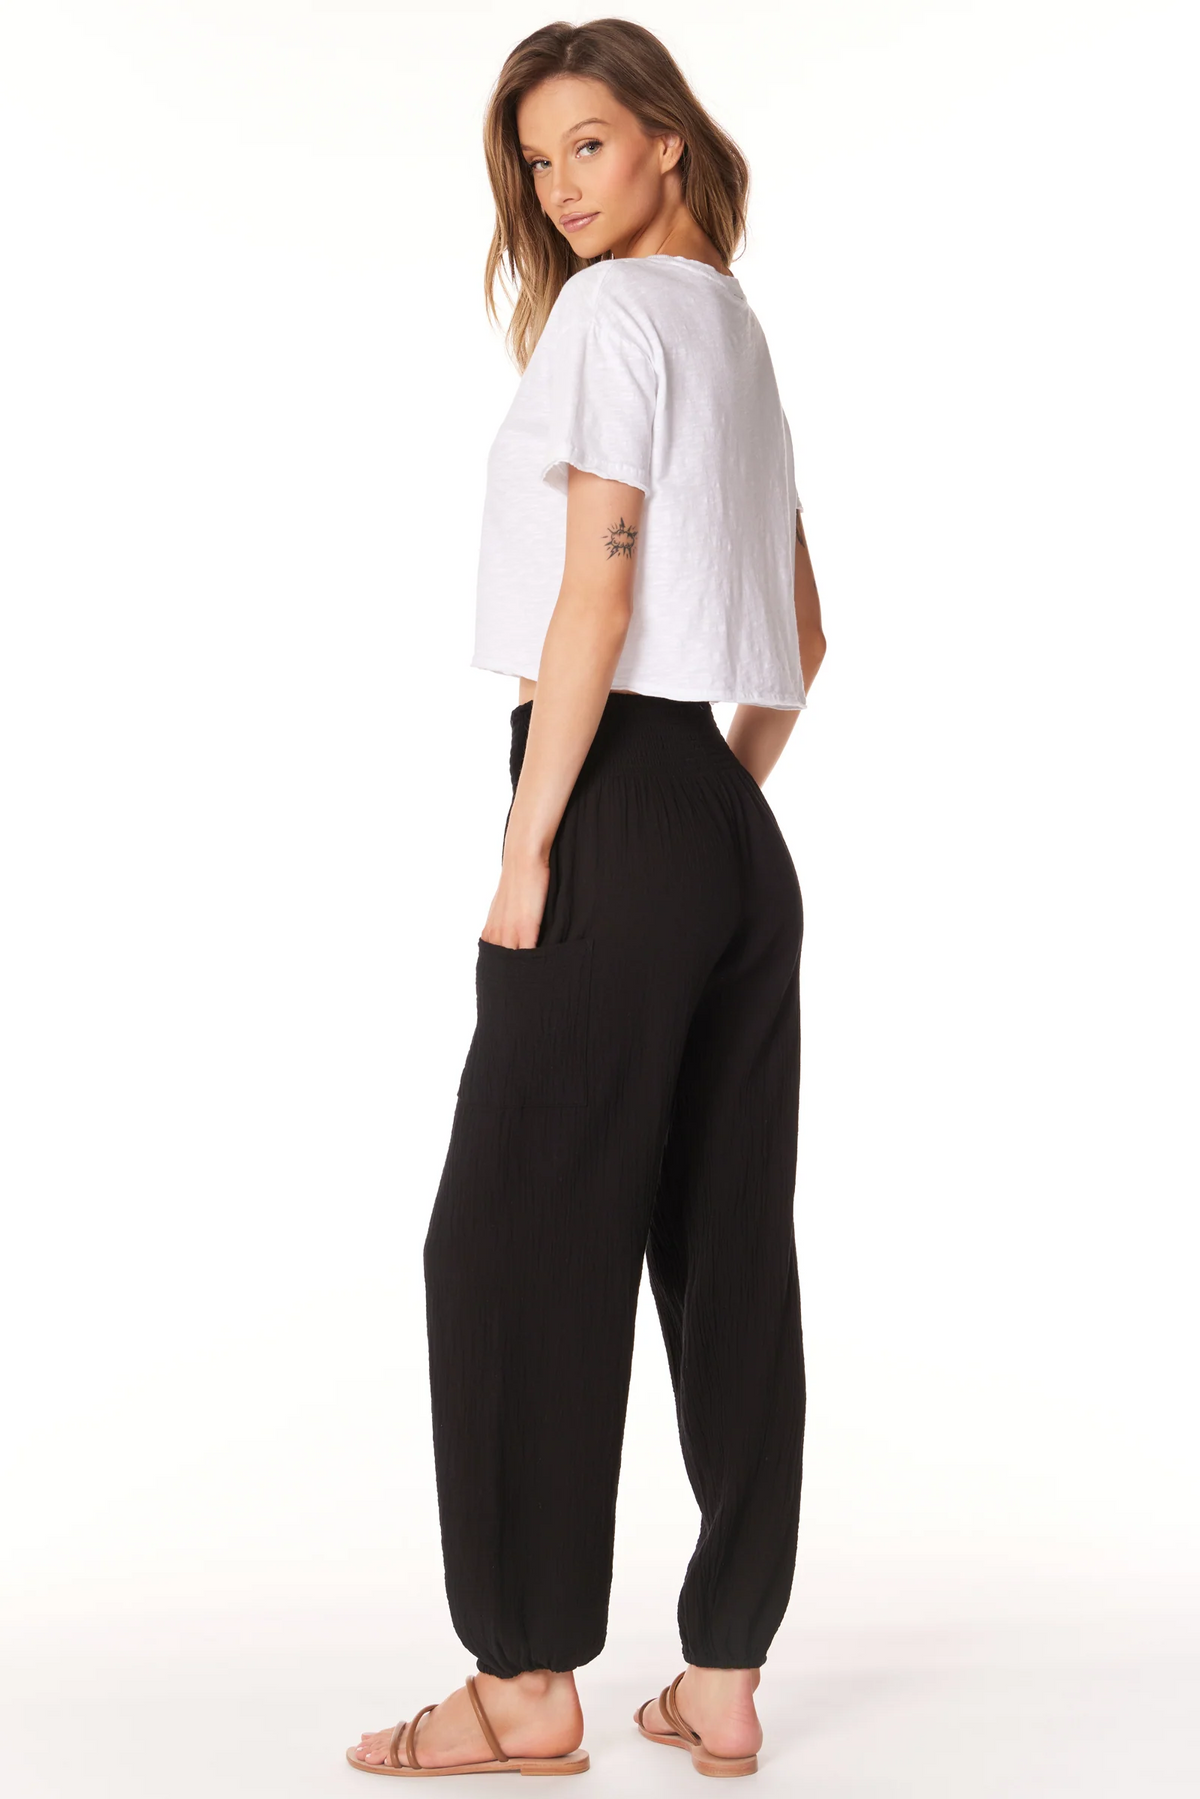 Bobi Smocked Beach Pant With Pockets in Black - Size M Available